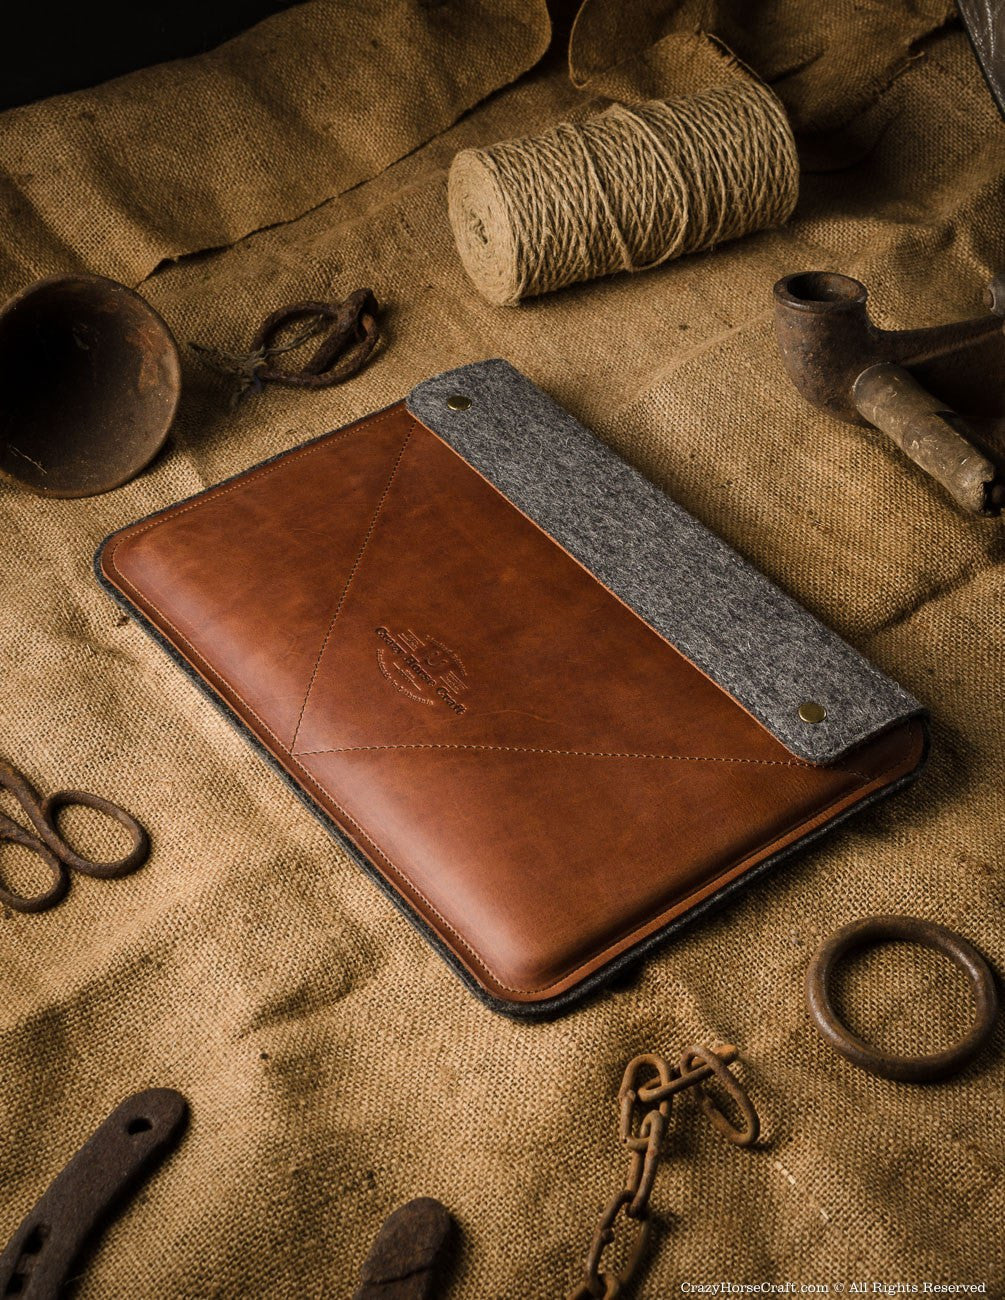 Leather Laptop Sleeves